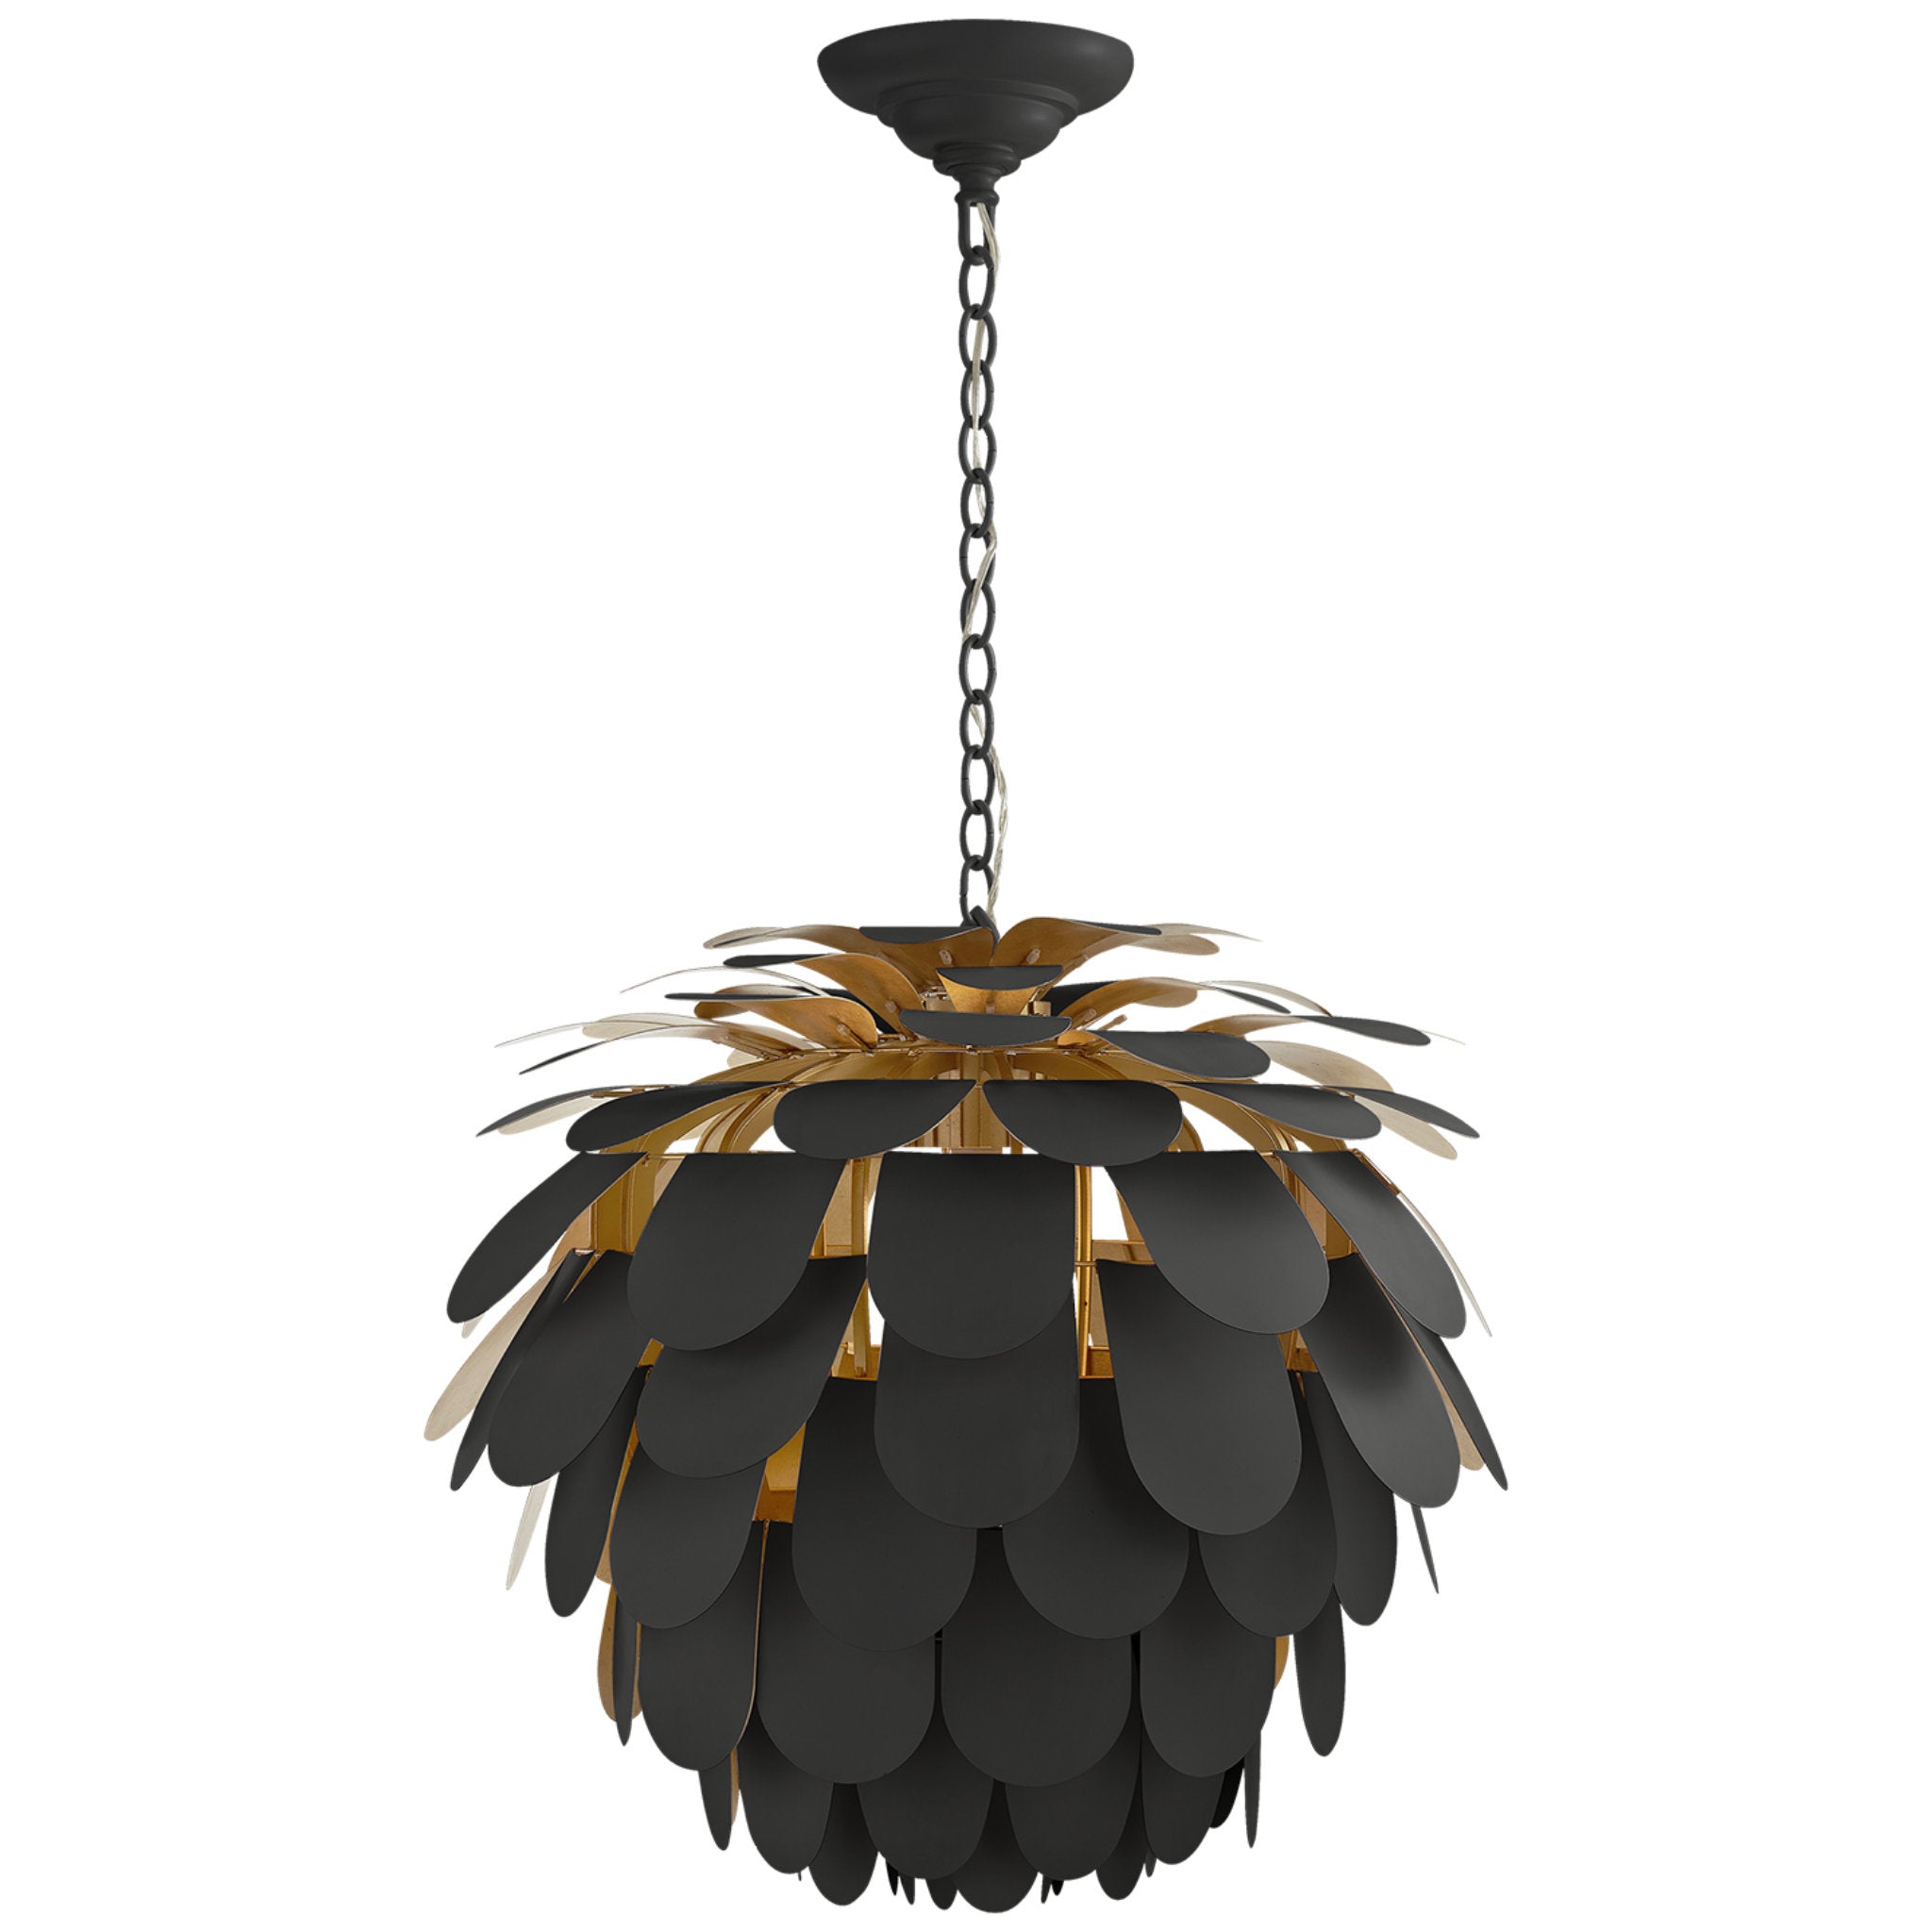 Chapman & Myers Cynara Large Chandelier in Matte Black and Gild